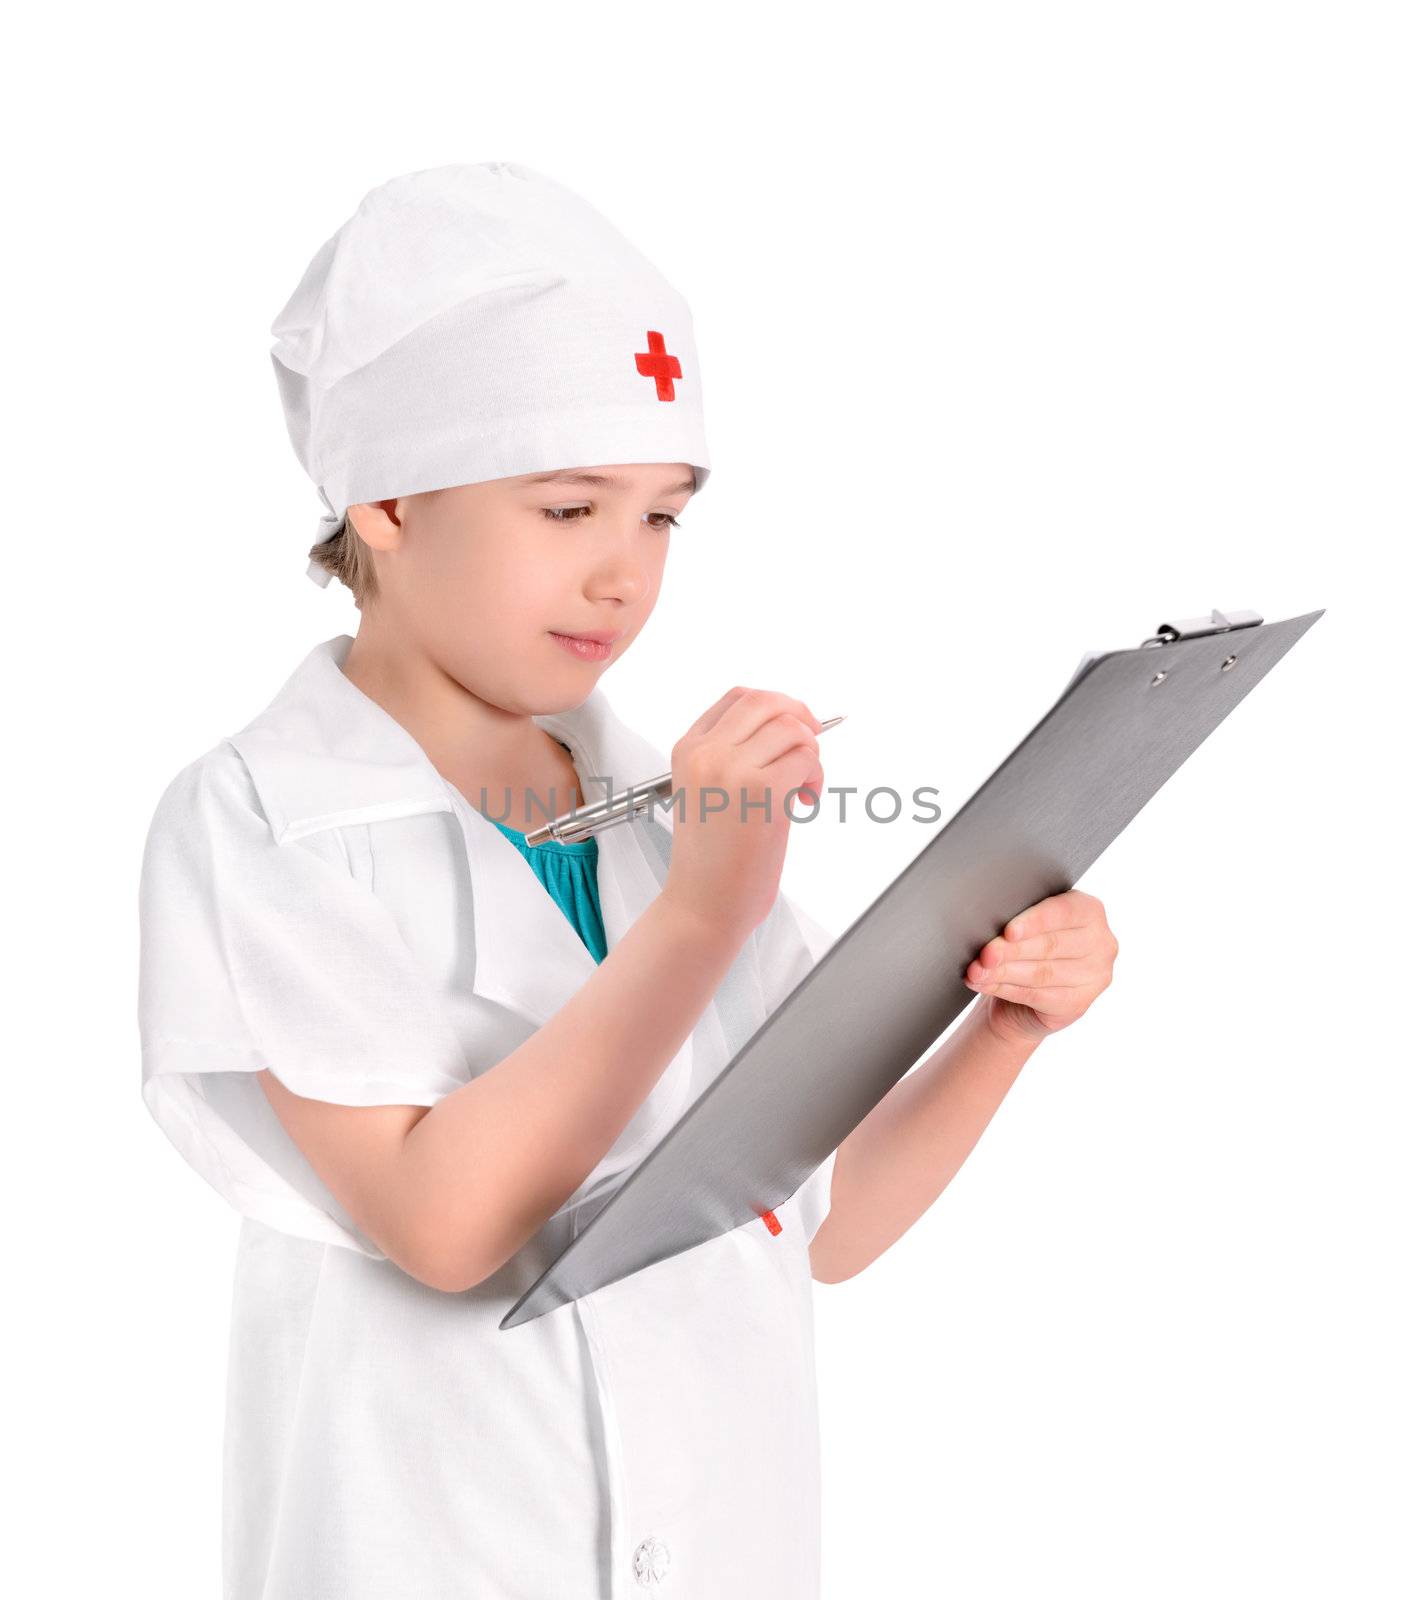 Serious little girl wearing as a nurse on white uniform writing prescription and preparing patients report. Isolated on white background.